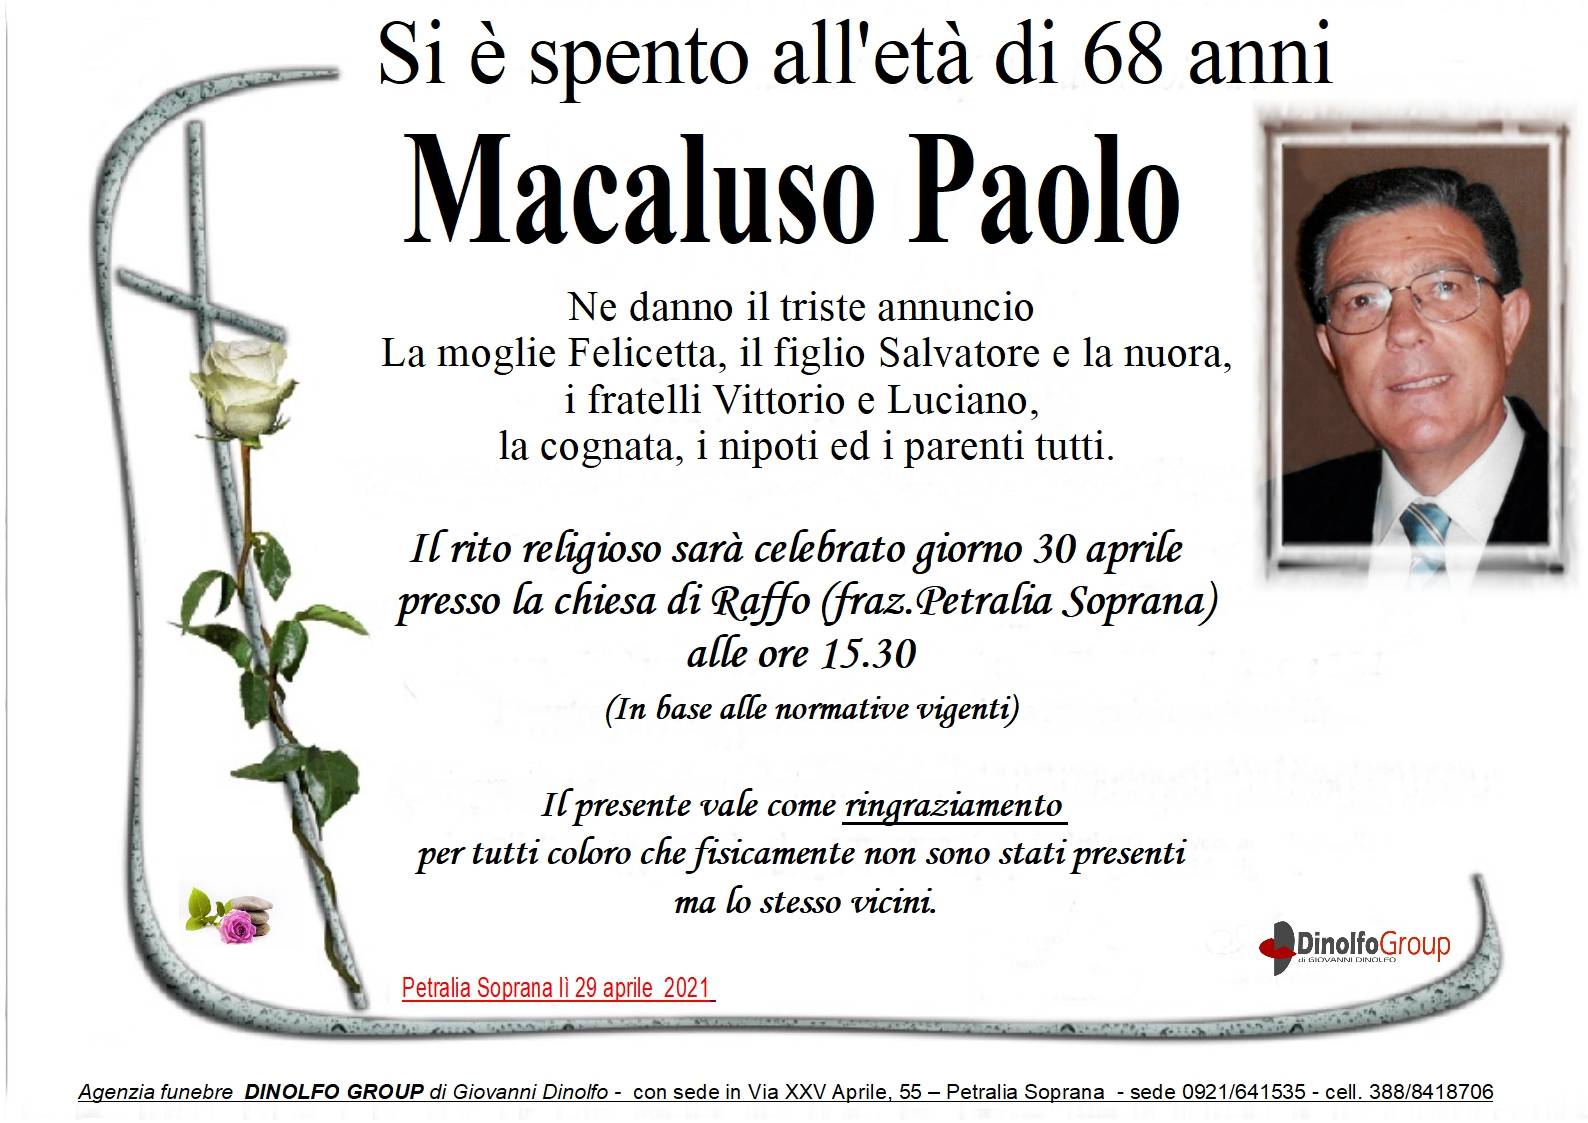 Paolo Macaluso